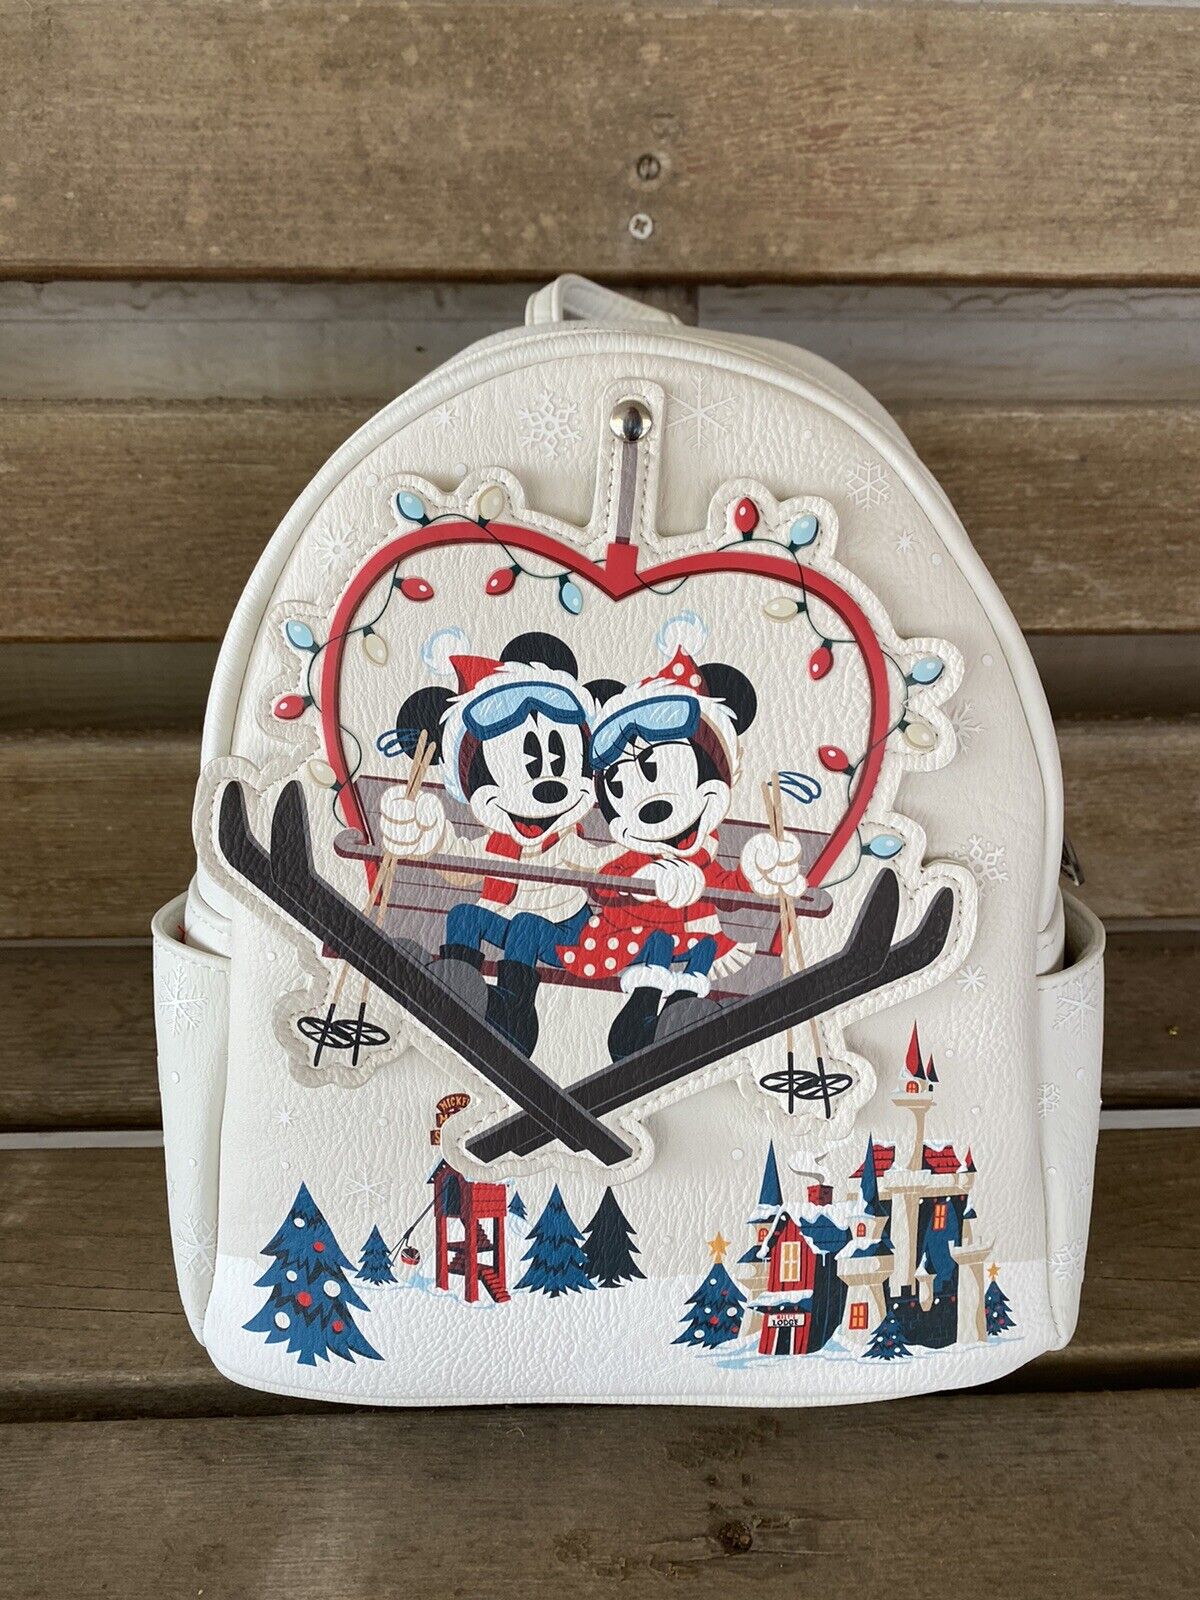 Adorable Disney Loungefly Mickey/Minnie Holiday Christmas  Backpack (Brand New)